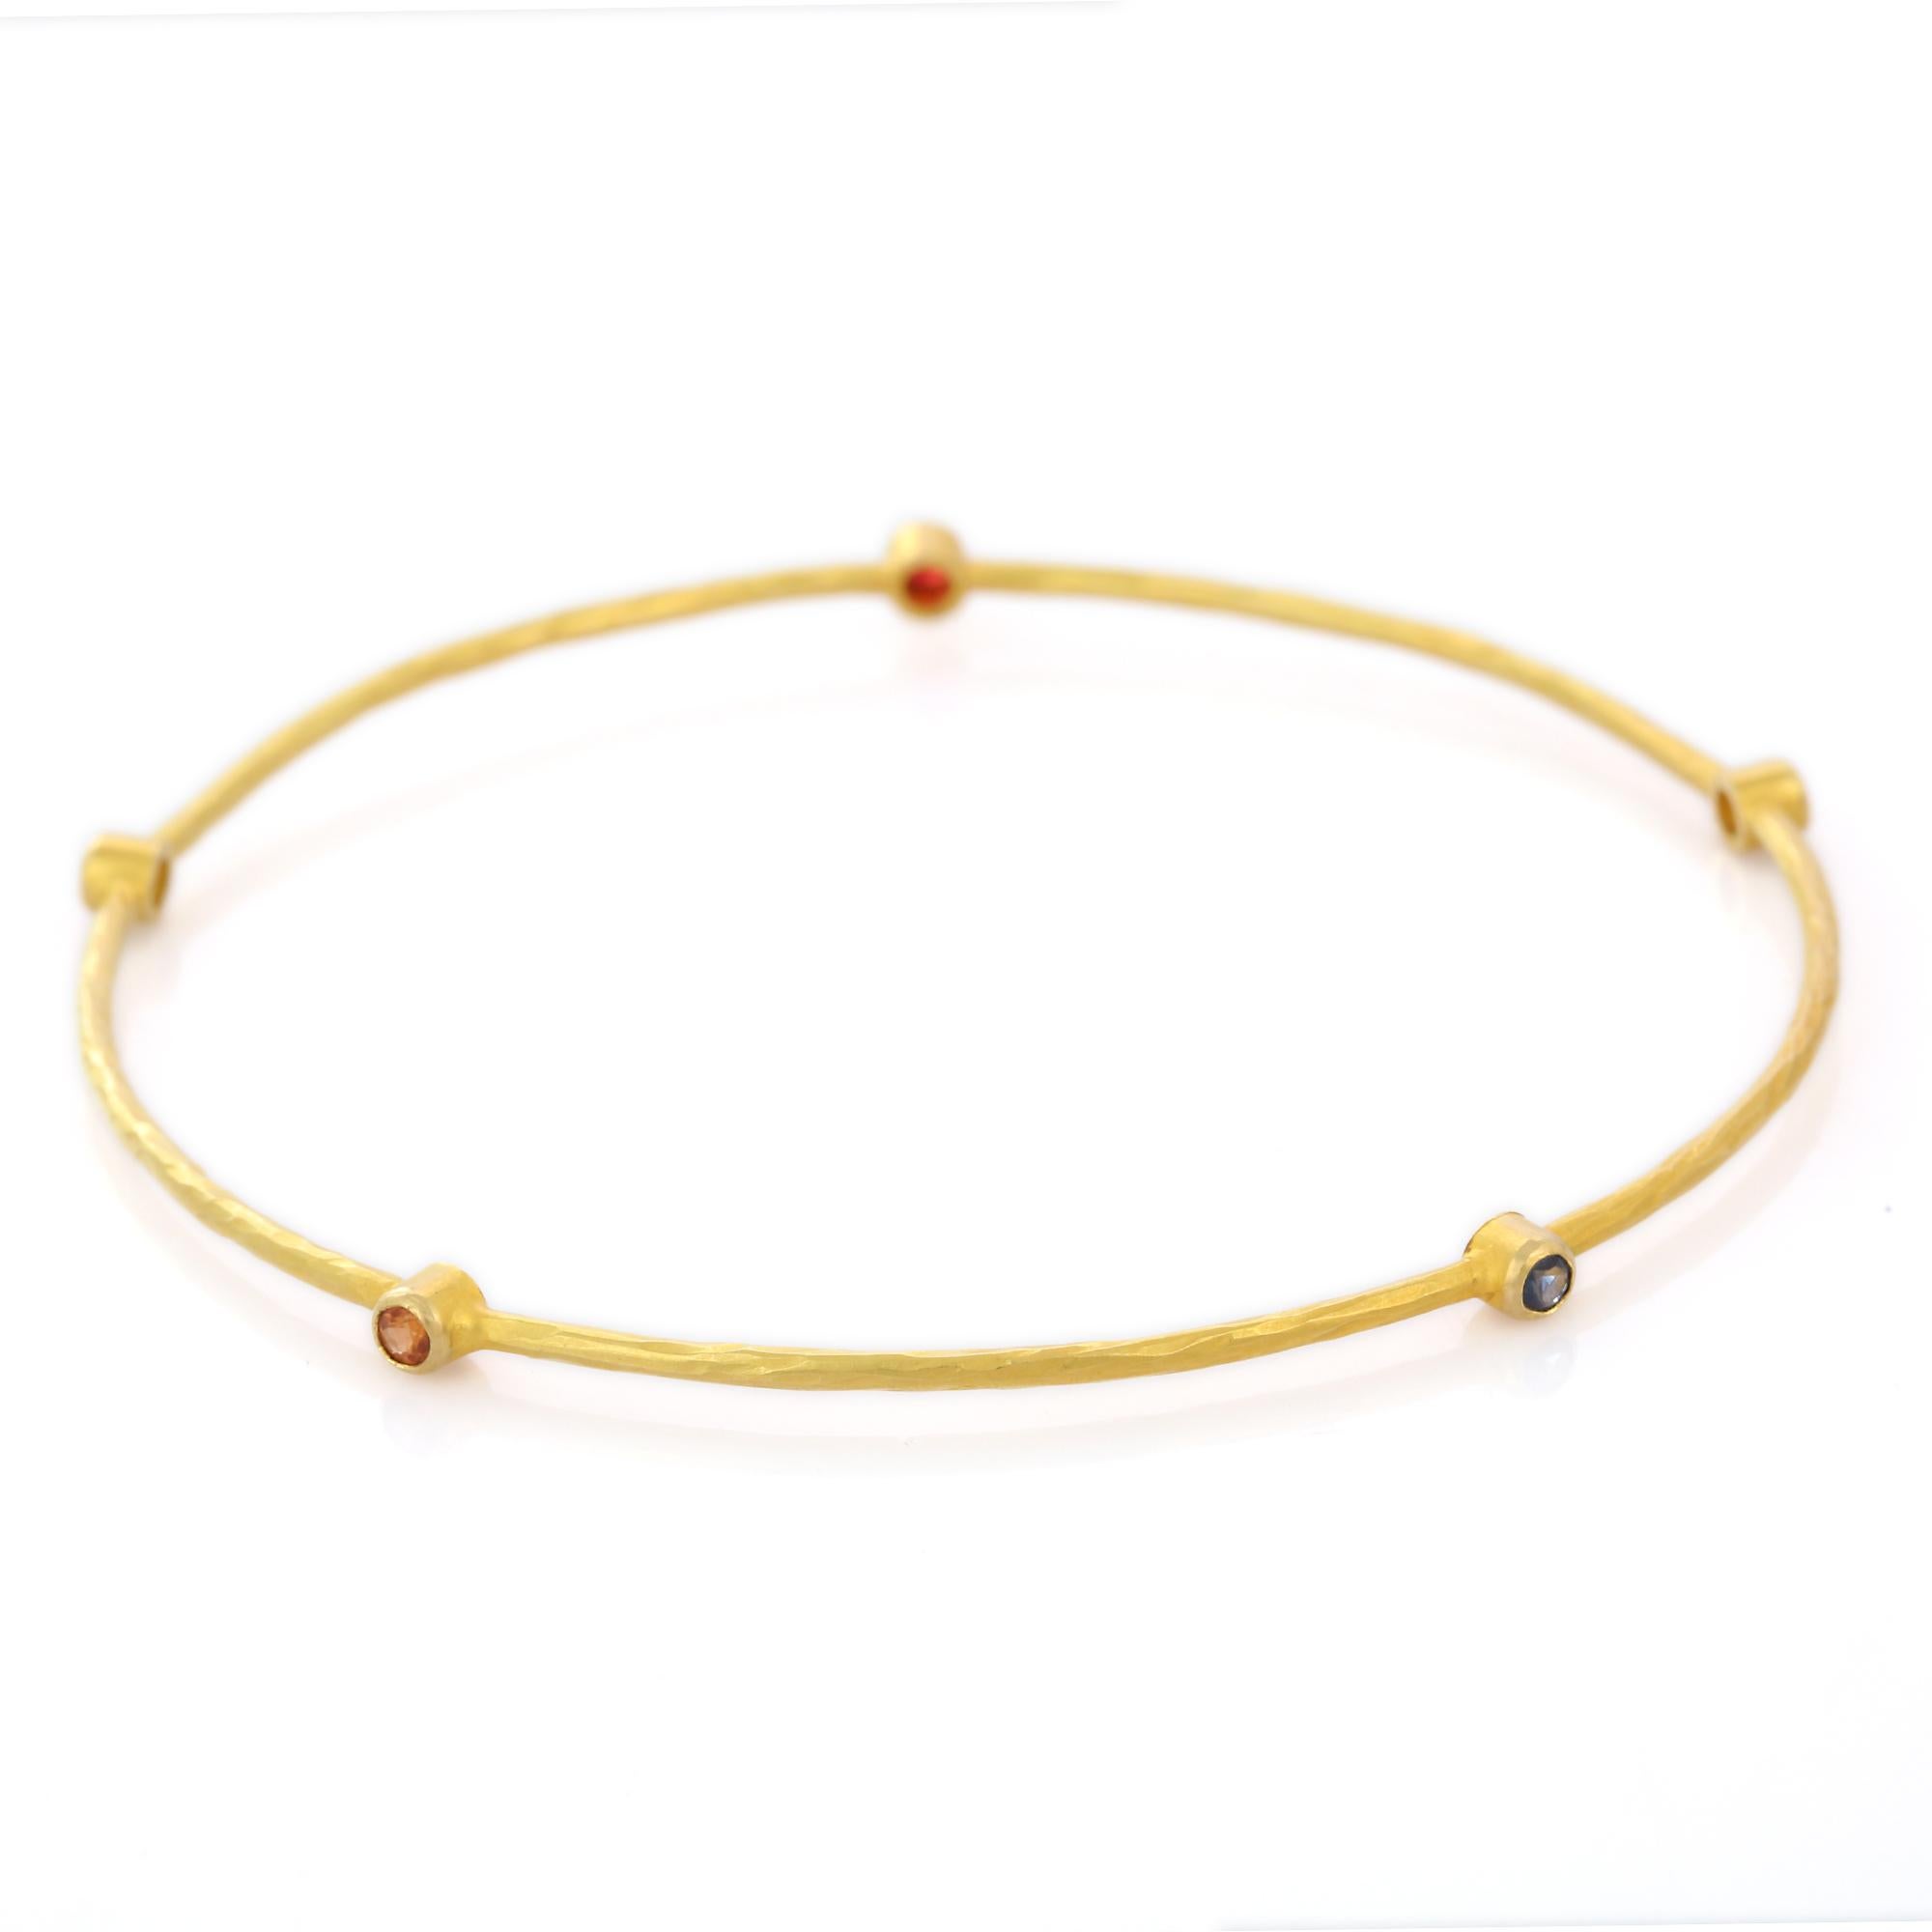 Multi gemstone Bangle in 18K Gold. It’s a great jewelry ornament to wear on occasions and at the same time works as a wonderful gift for your loved ones. These lovely statement pieces are perfect generation jewelry to pass on.
Bangles feel